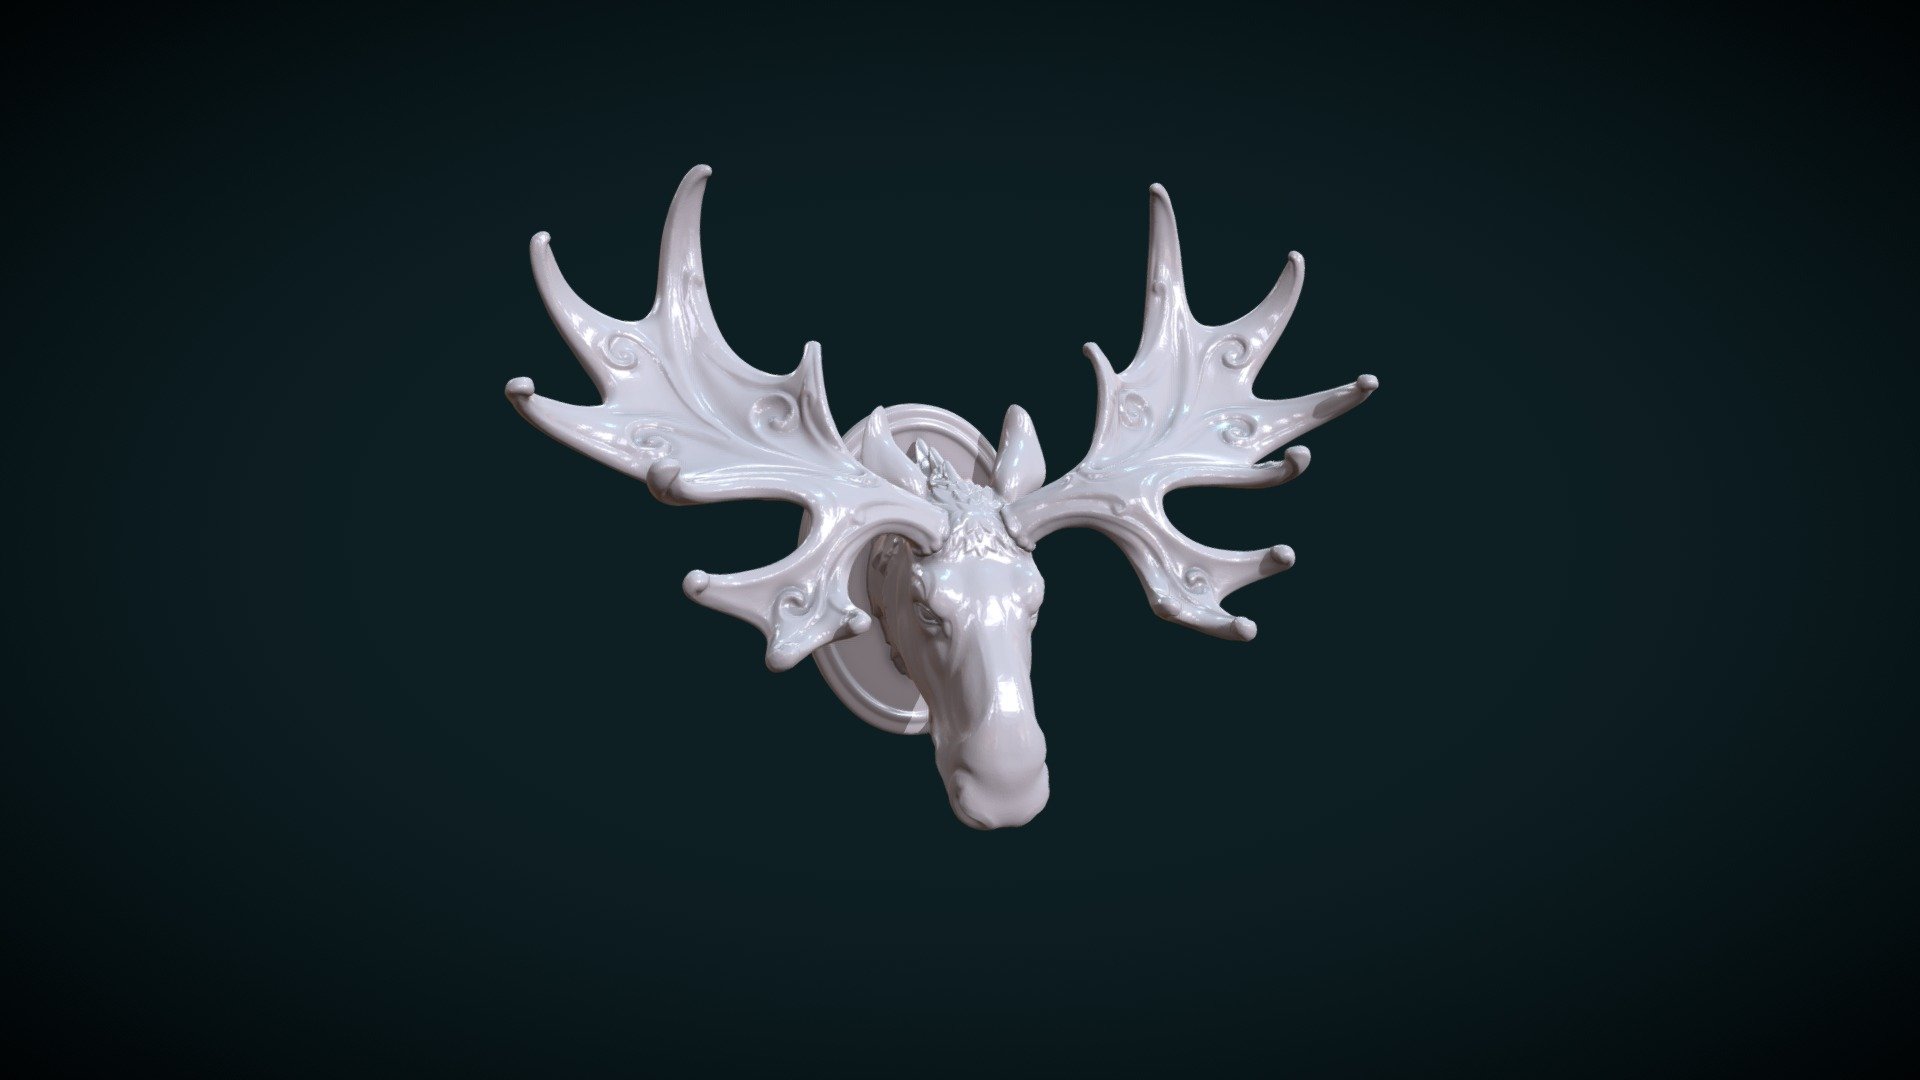 A print ready moose.

Measure units are millimeters, the figure is about 8.3 cm in width.

Mesh is manifold, no holes, no inverted faces, no bad contiguous edges.

Available formats: .blend, .stl, .obj, .fbx, .dae

Here is three versions of the model:

1) M_Head_op. (blend, .obj, .fbx, .dae. stl) This files contain the moose head that is one solid piece with antlers. The model consists of 334336 triangular faces with the base.

2) M_Head_tp. (blend, .obj, .fbx, .dae. stl) In case of this files here is the antlers and the head as separate objects. Here is 402796 triangular faces.

3) M_Head_op_hlw. And here is failes that contain a hollw version of head, in this case the antlers are part of the object(they are not separate). For this version here is .blend and .stl files 3d model